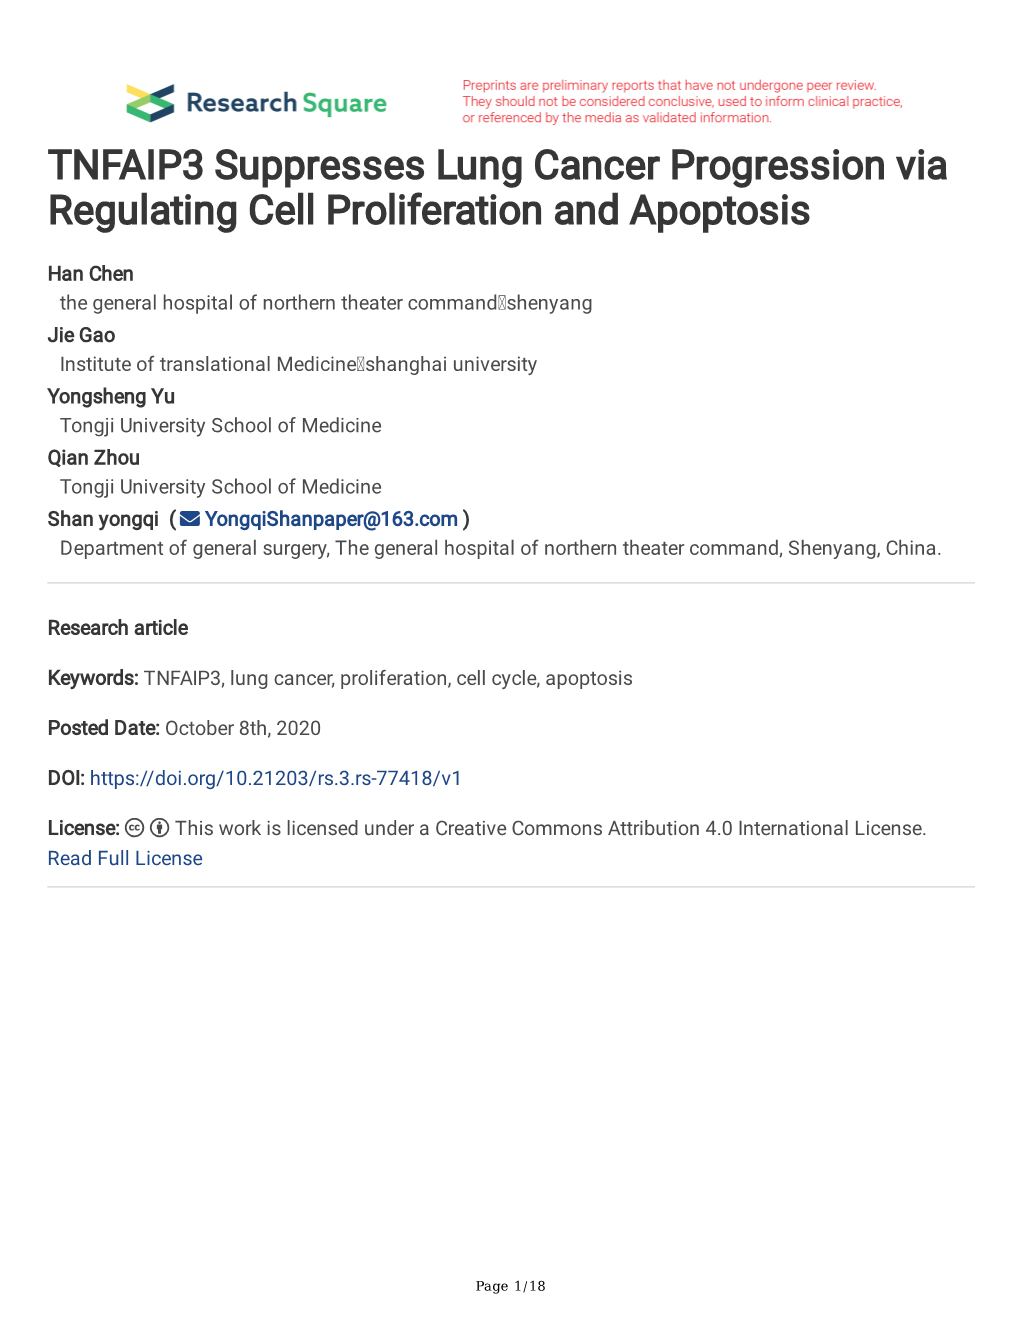 TNFAIP3 Suppresses Lung Cancer Progression Via Regulating Cell Proliferation and Apoptosis